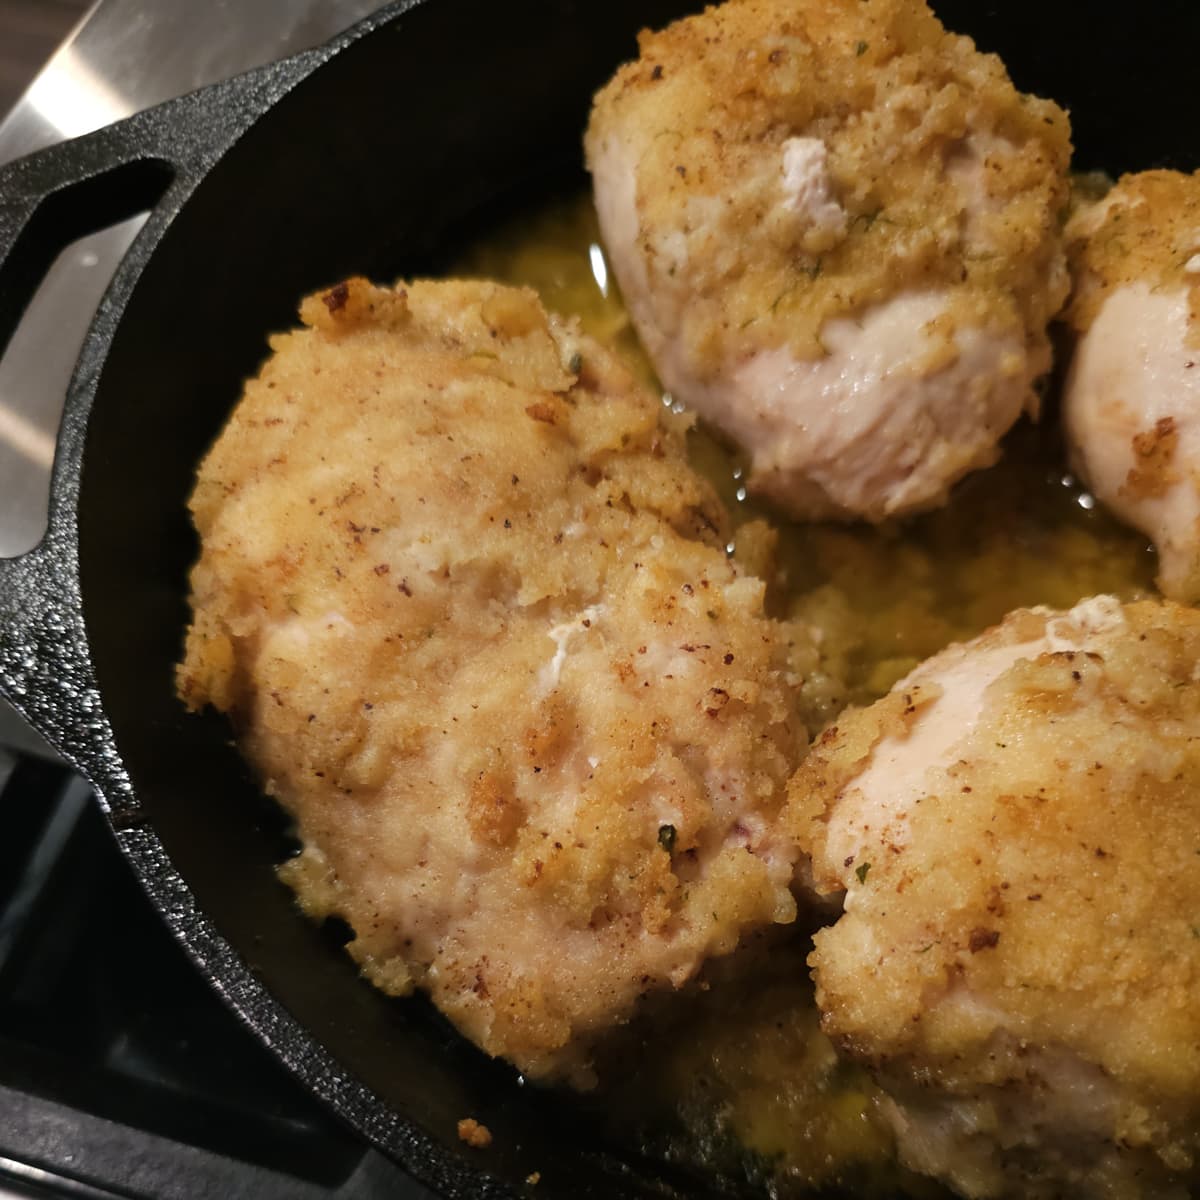 Smoked Chicken Kiev in a cast iron pan.